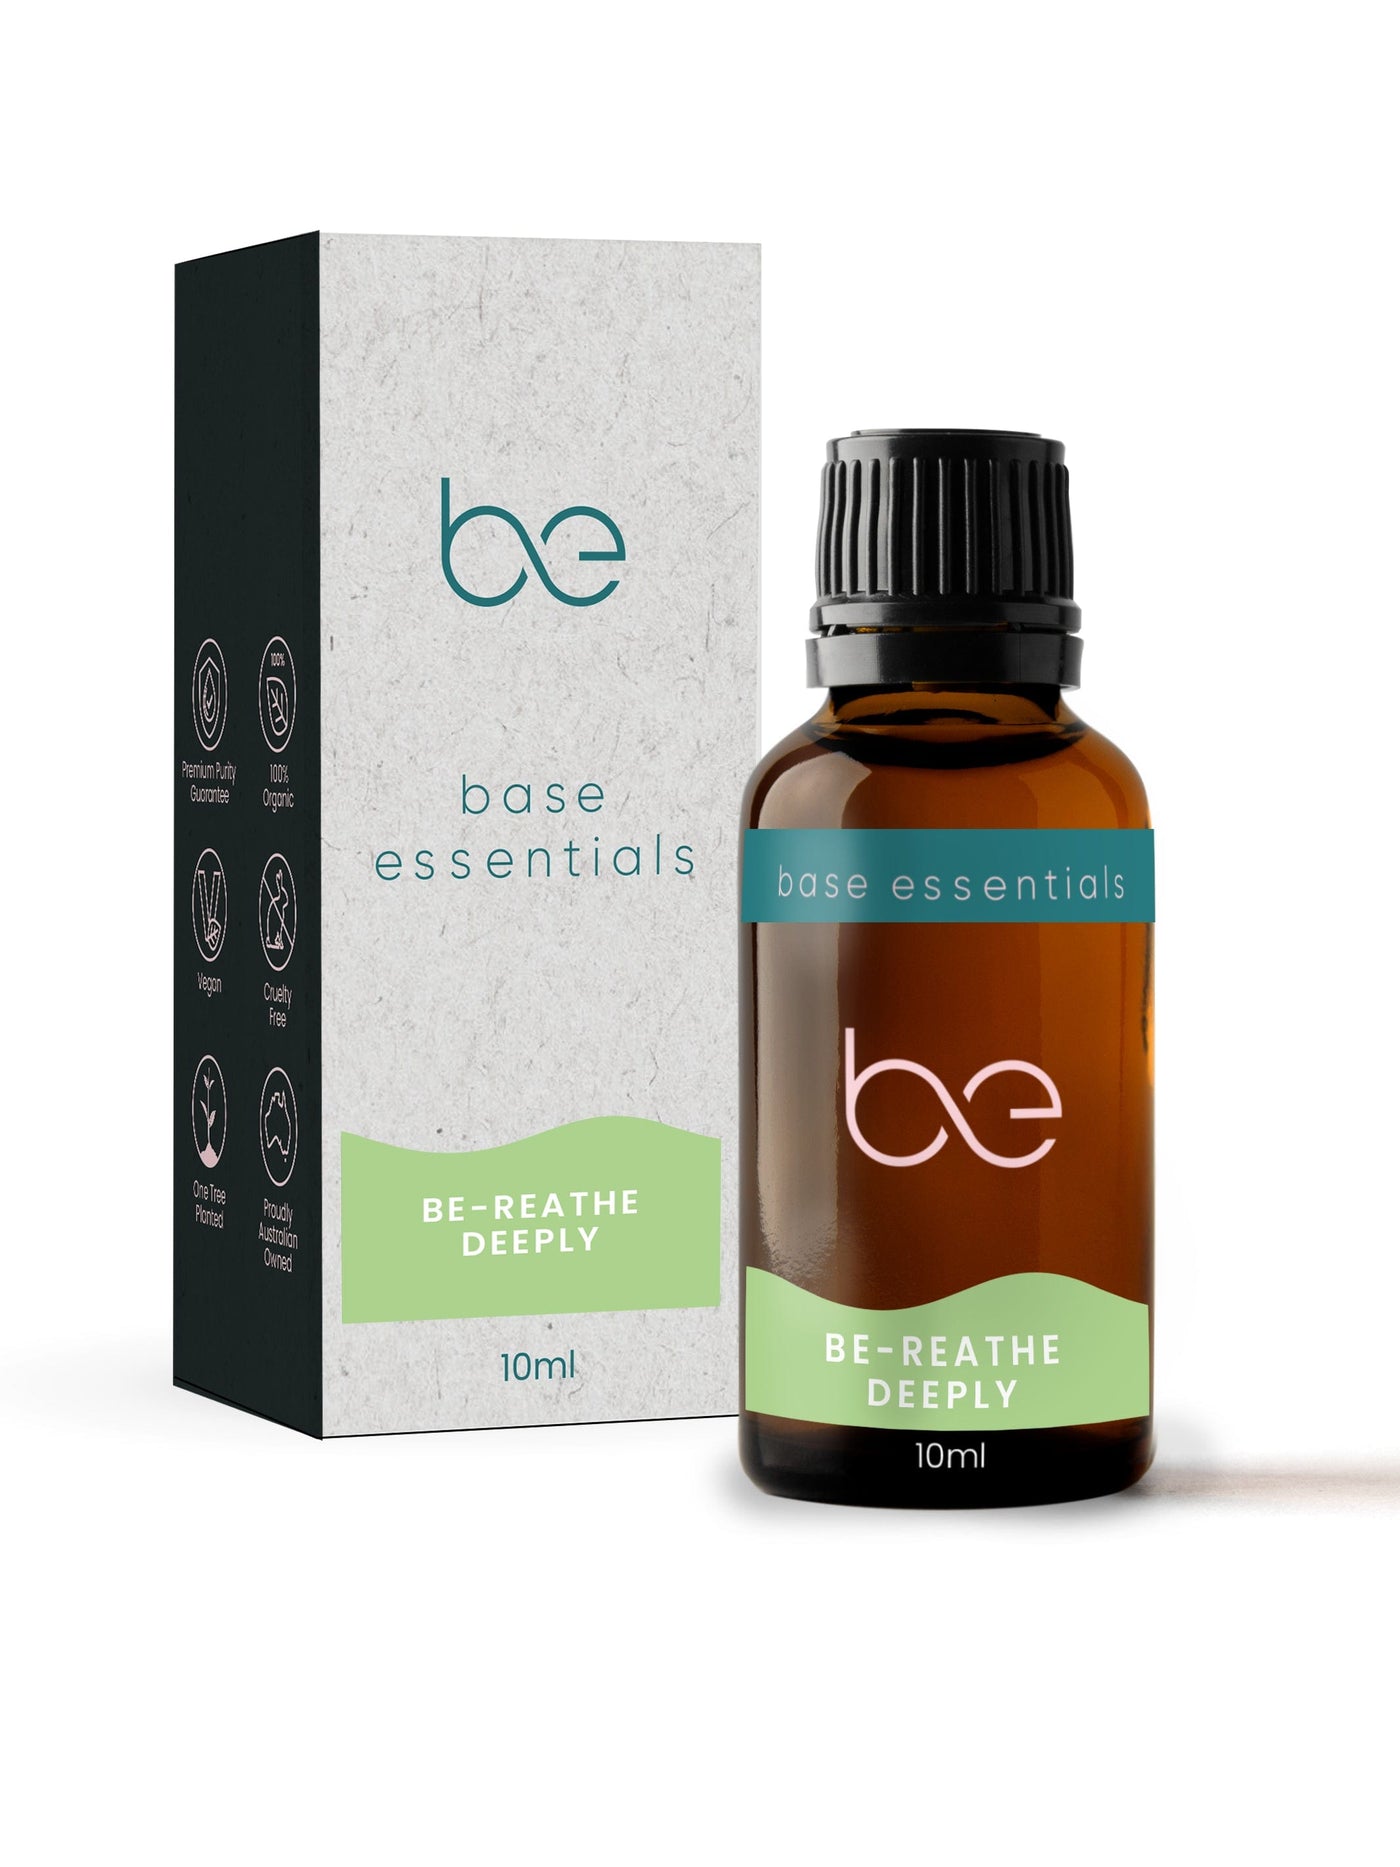 Base Essentials Blended Oil Be-reathe Deeply Pure Essential Oil Blend, Organic 10ml